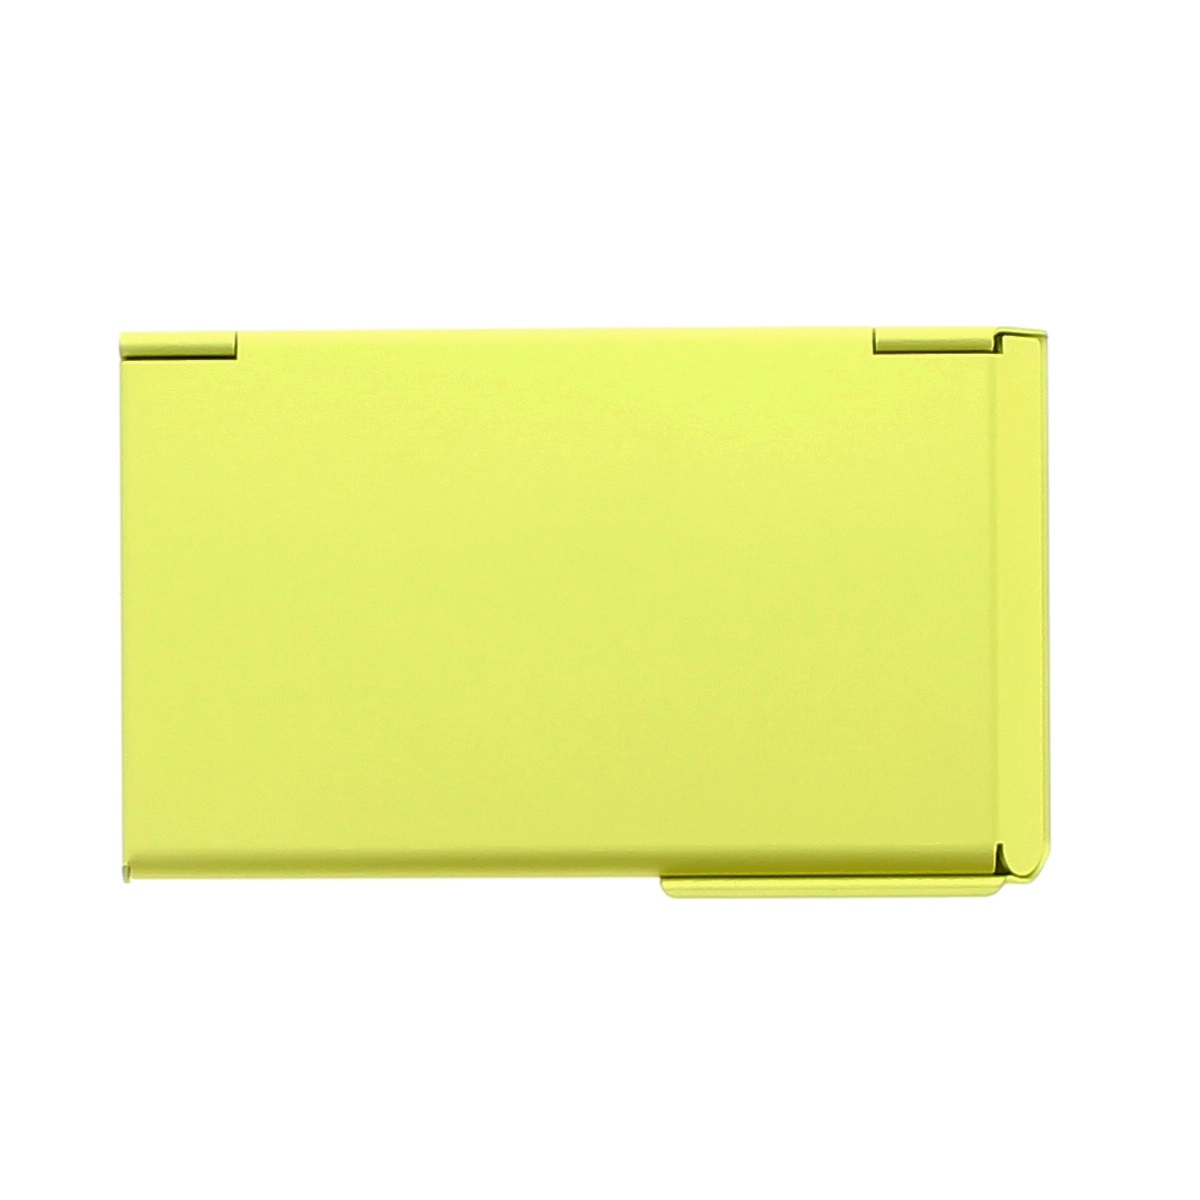 OGON Aluminum Business card holder One Touch - Green Lime